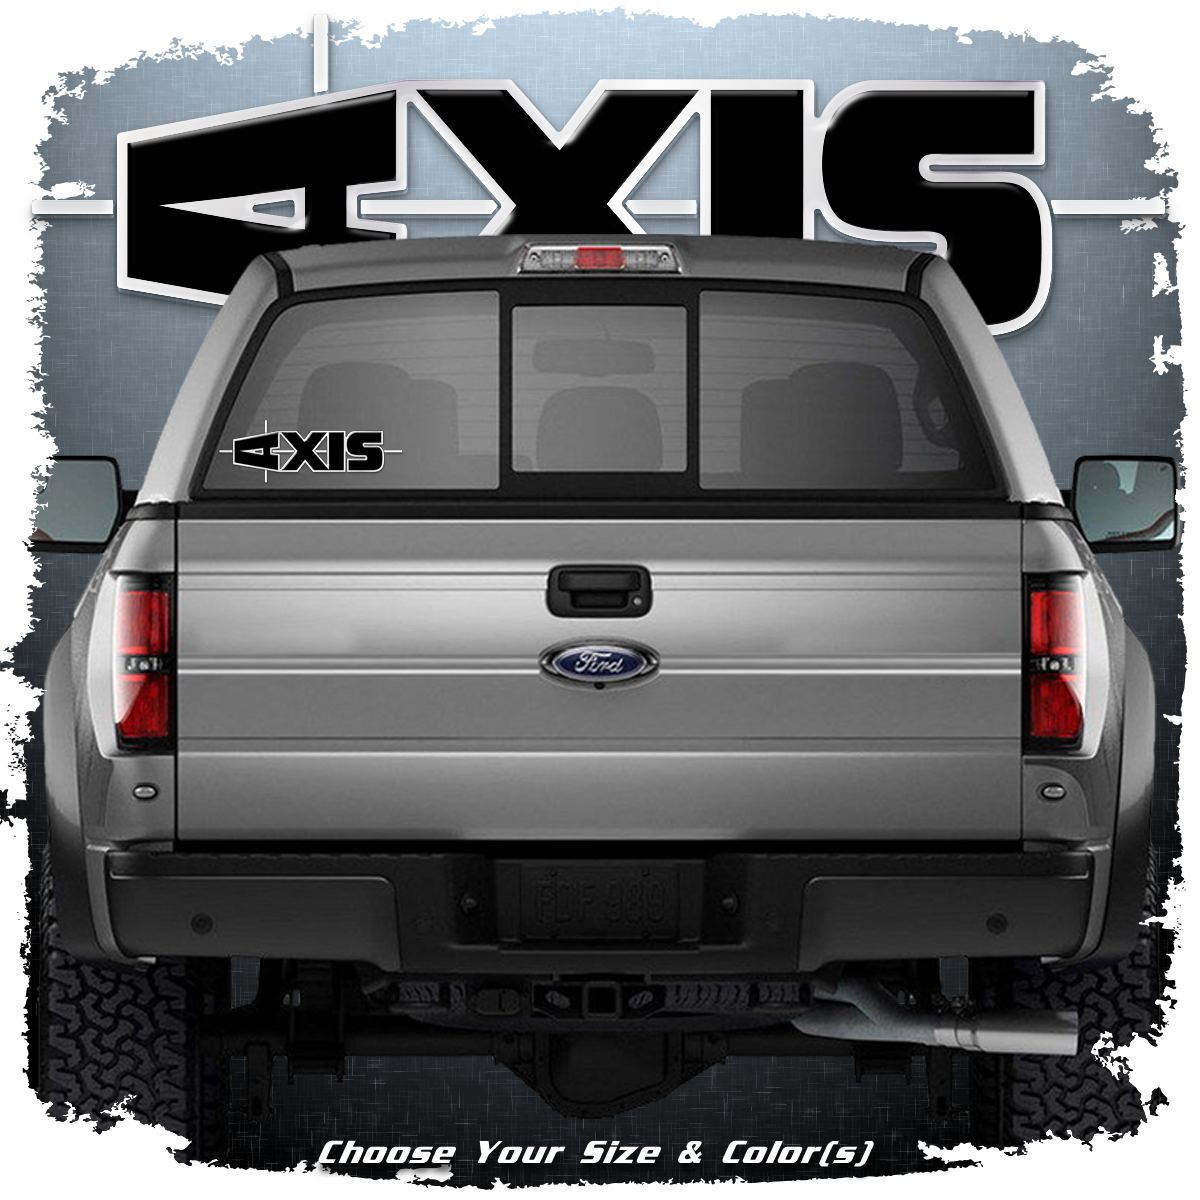 AXIS Window Decal, Choose Your Colors!